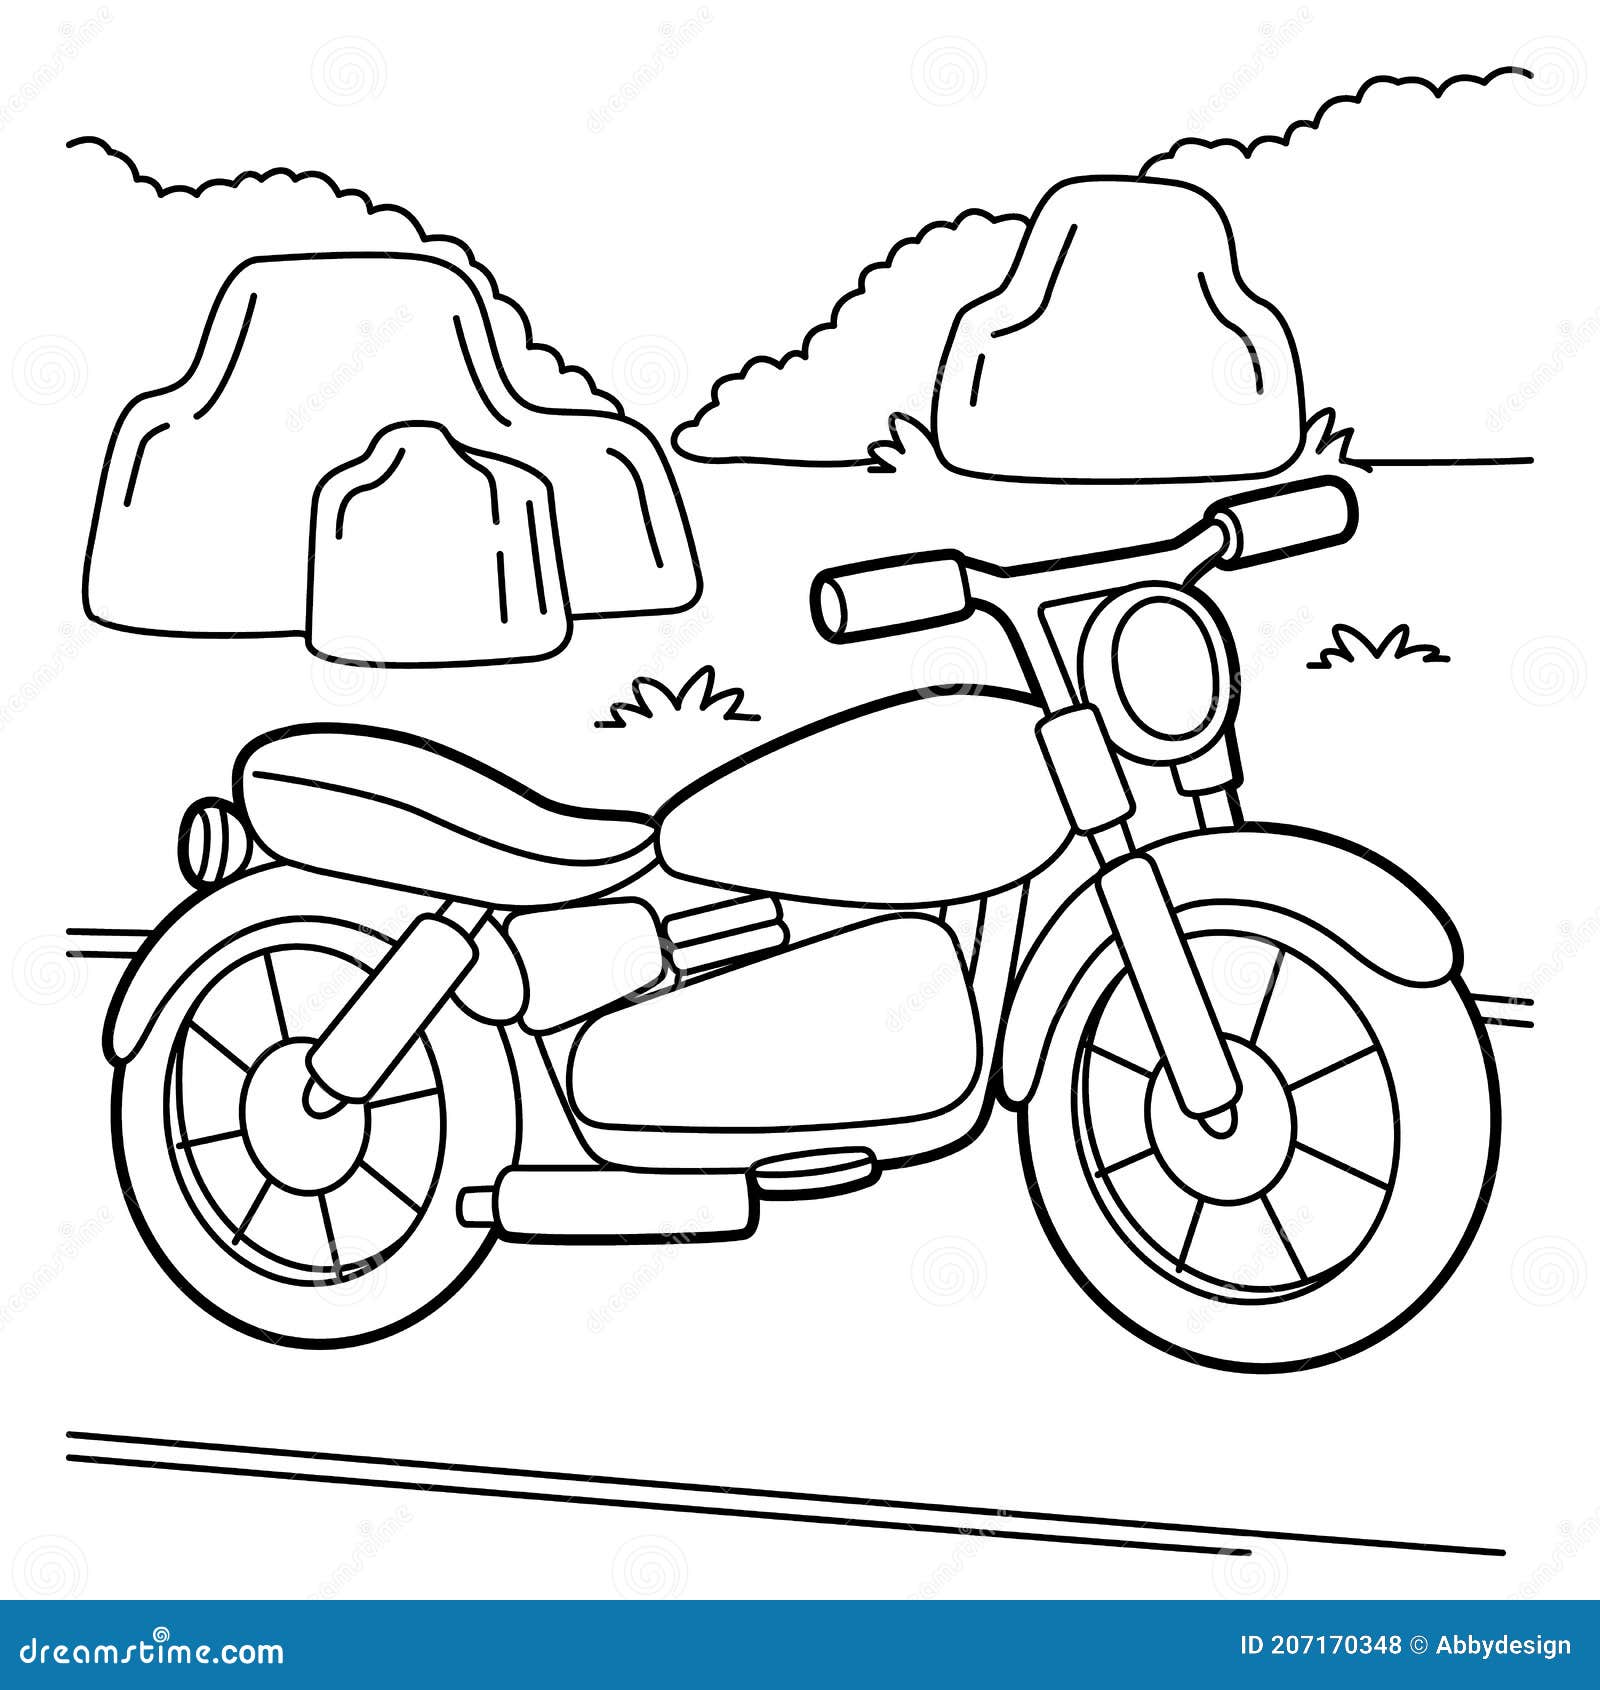 Motorcycle coloring page stock illustration illustration of race